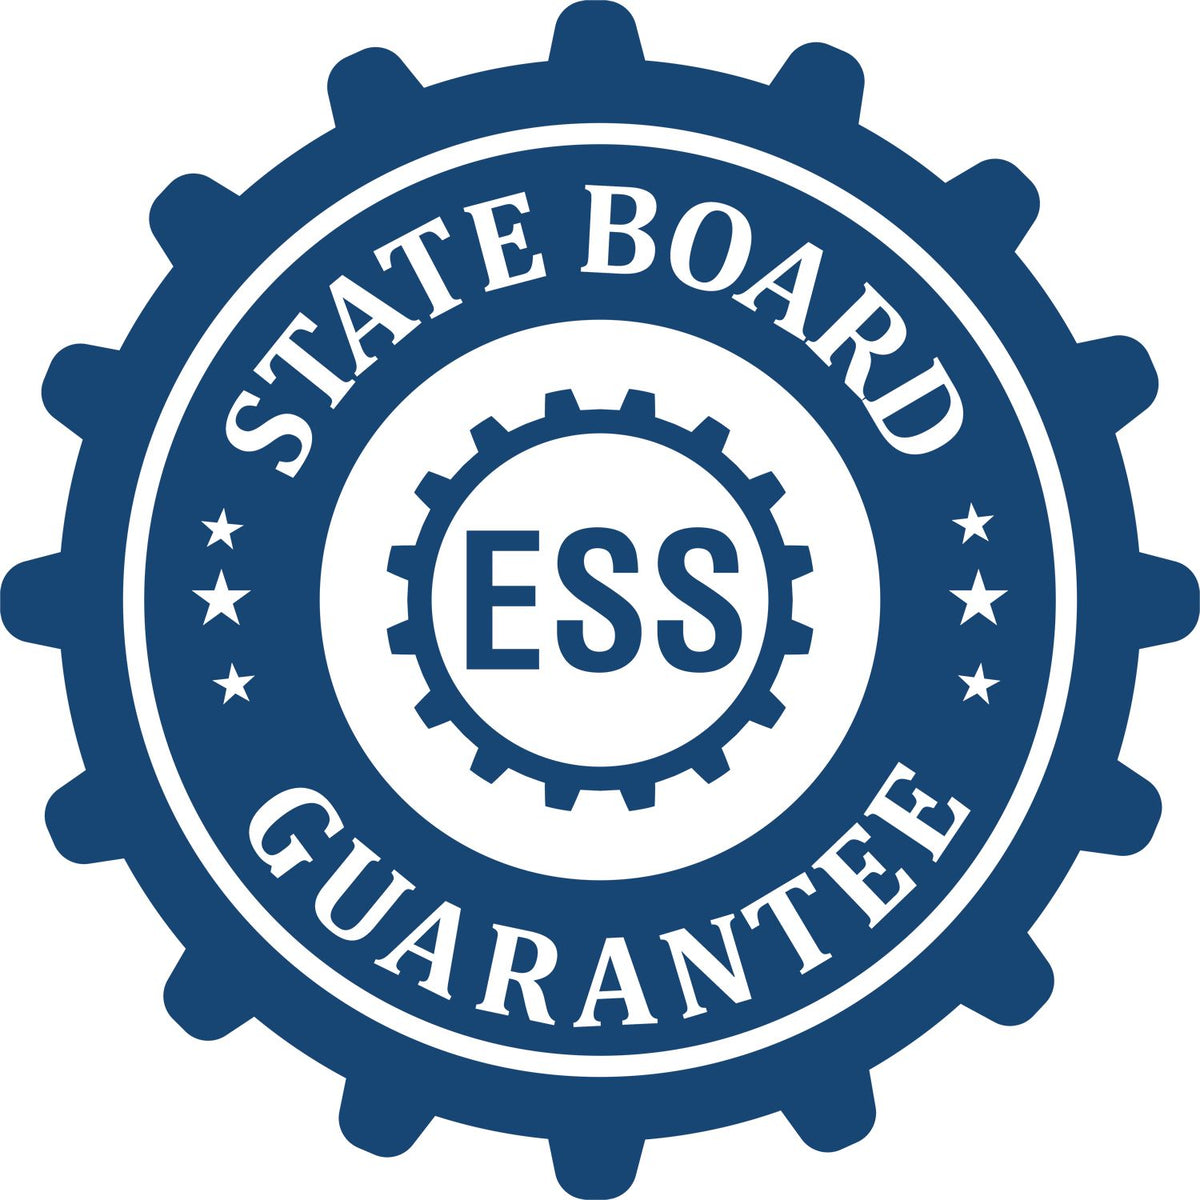 An emblem in a gear shape illustrating a state board guarantee for the New Mexico Engineer Desk Seal product.